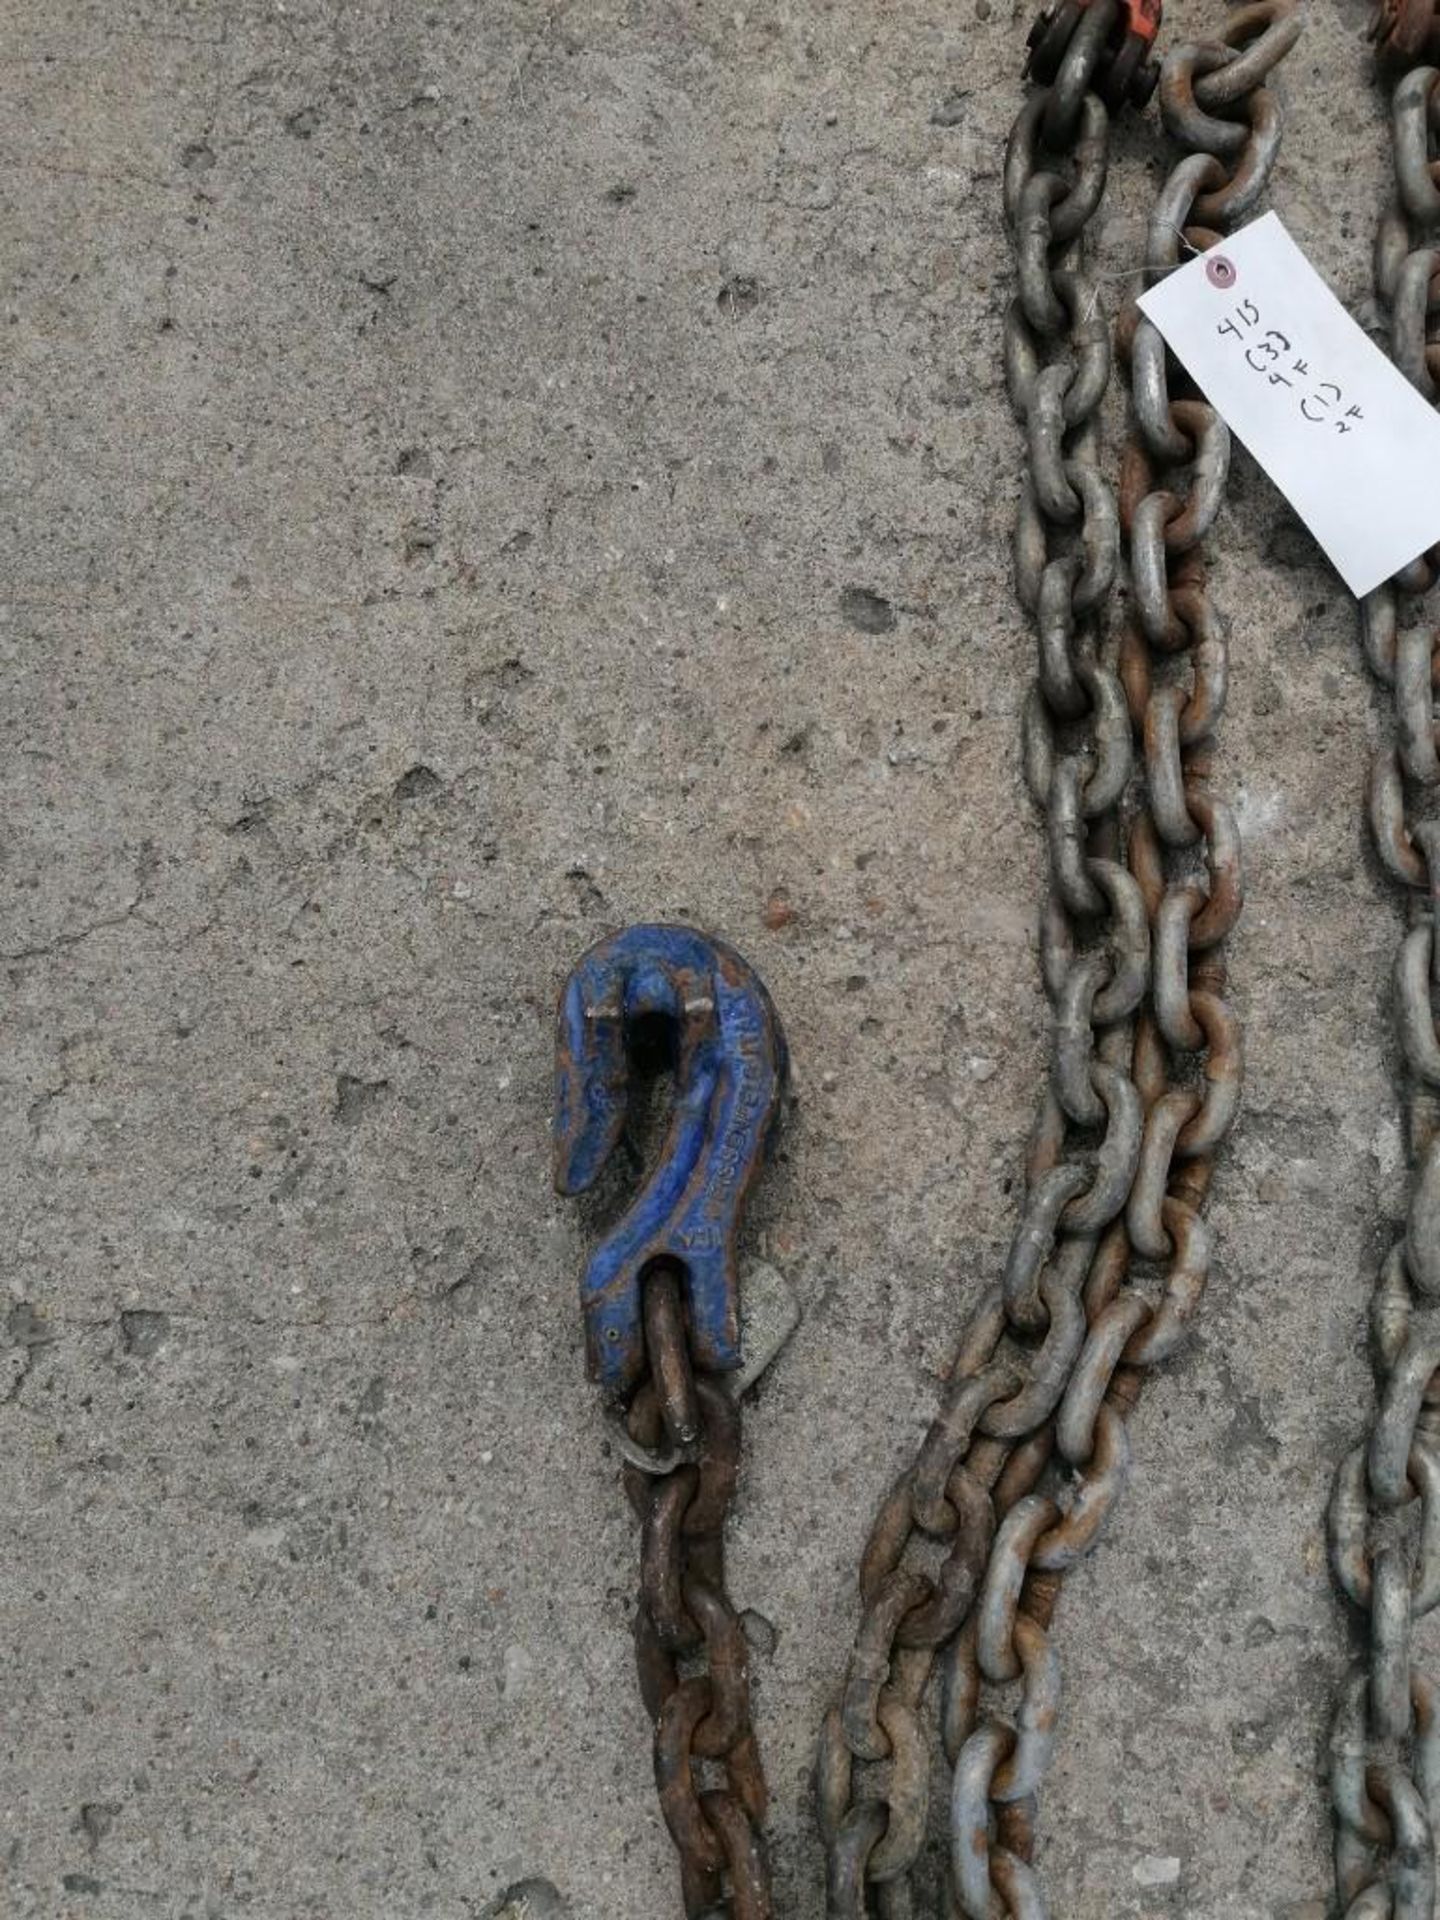 (3) 1/2" USA 4' & (1) 1/2" USA 2' Chain with Hook. Located at 301 E Henry Street, Mt. Pleasant, IA - Image 4 of 4